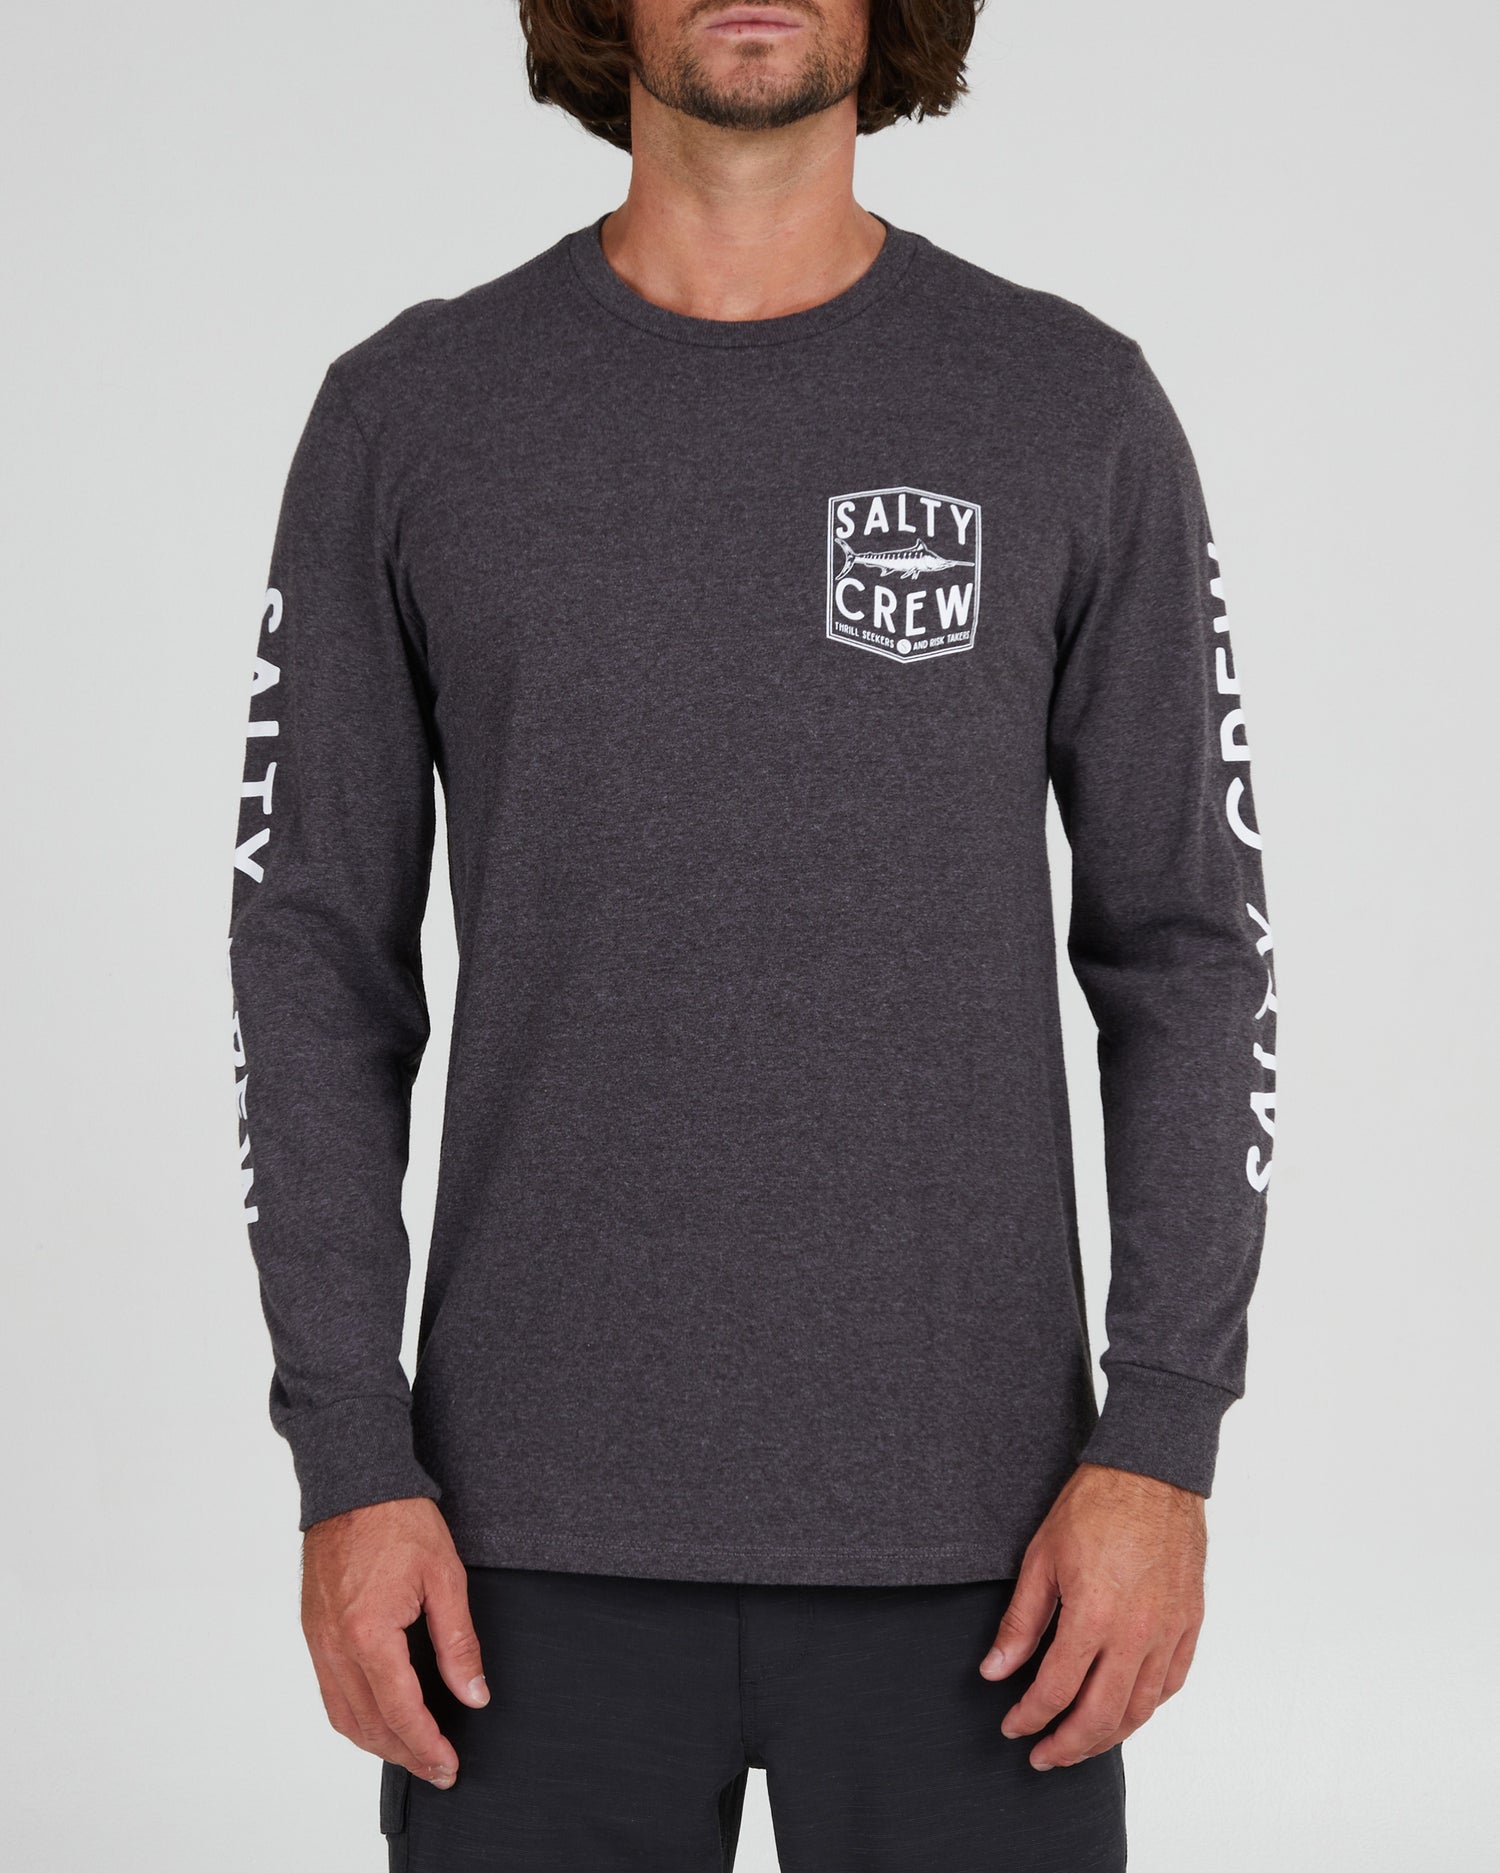 On body front of the Fishery Charcoal Heather L/S Standard Tee